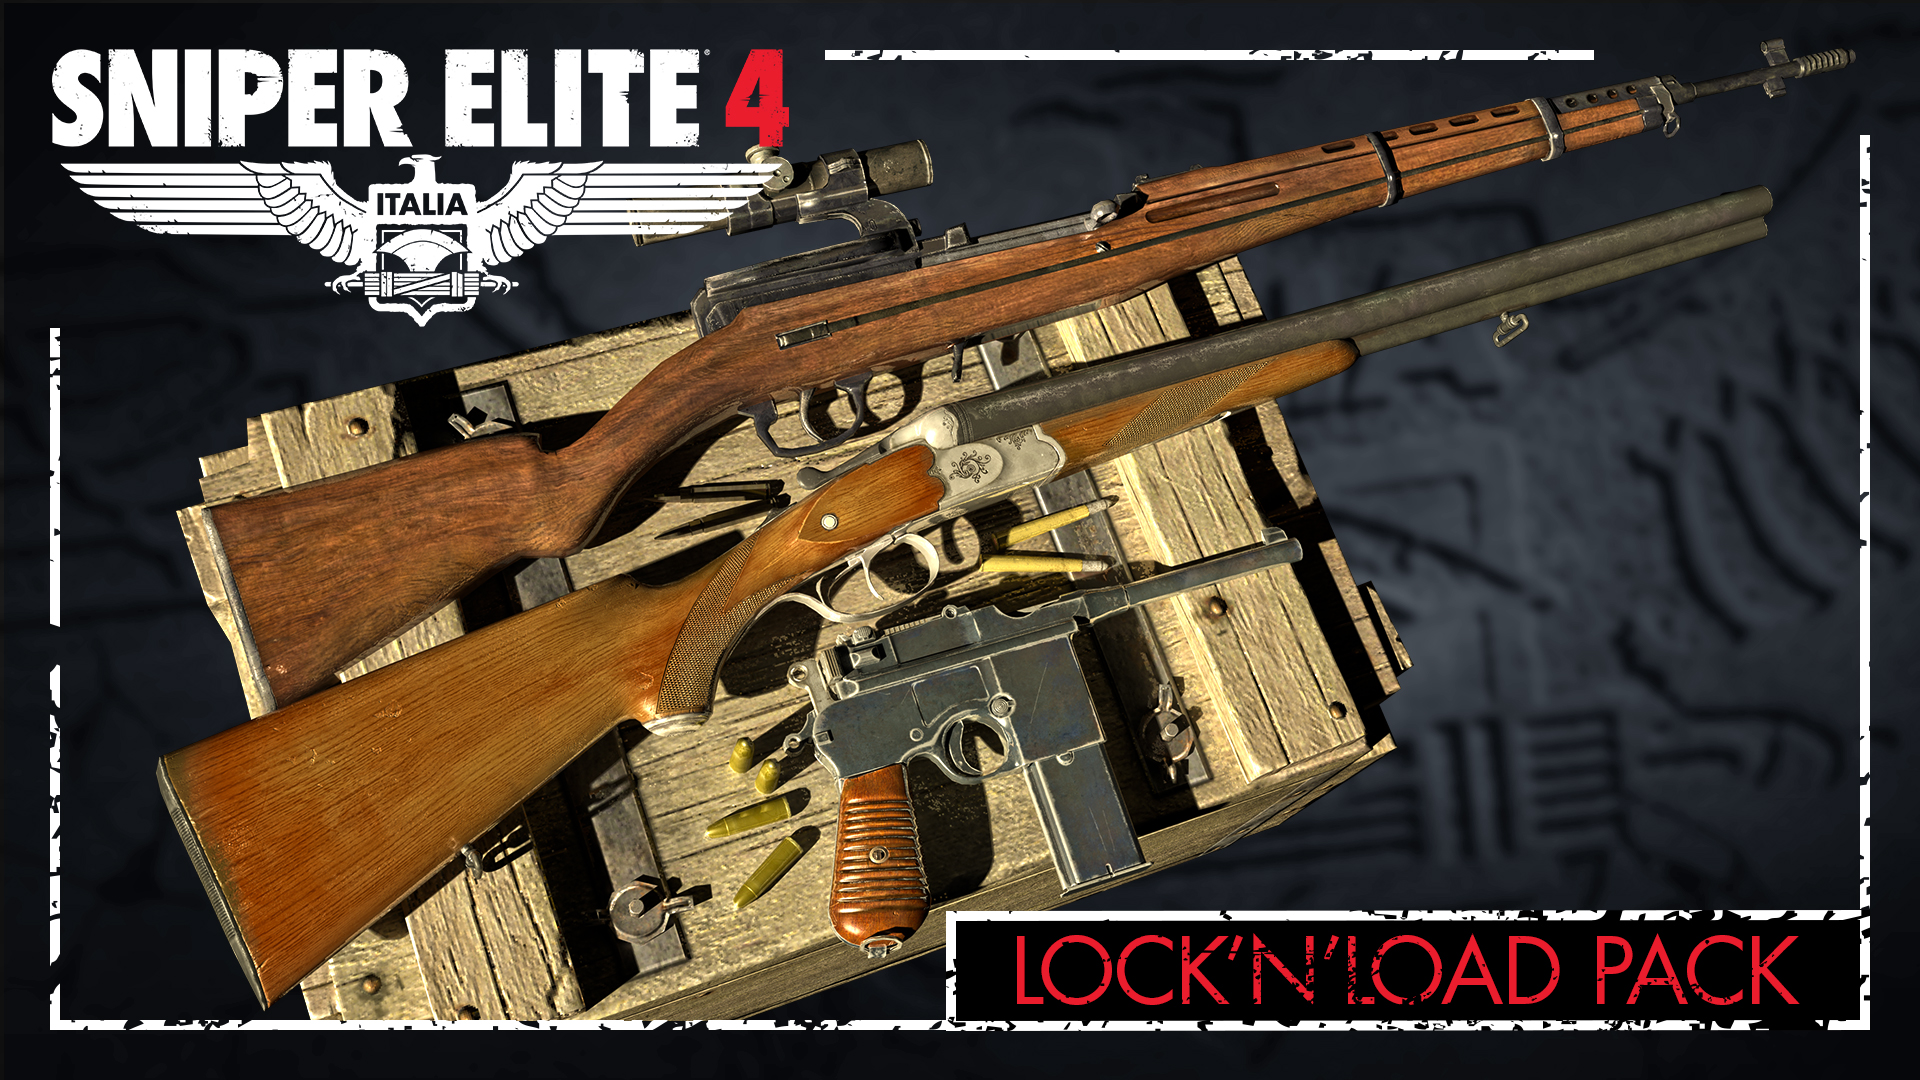 Sniper Elite 4 - Lock and Load Weapons Pack DLC Steam CD Key, 4.51 usd